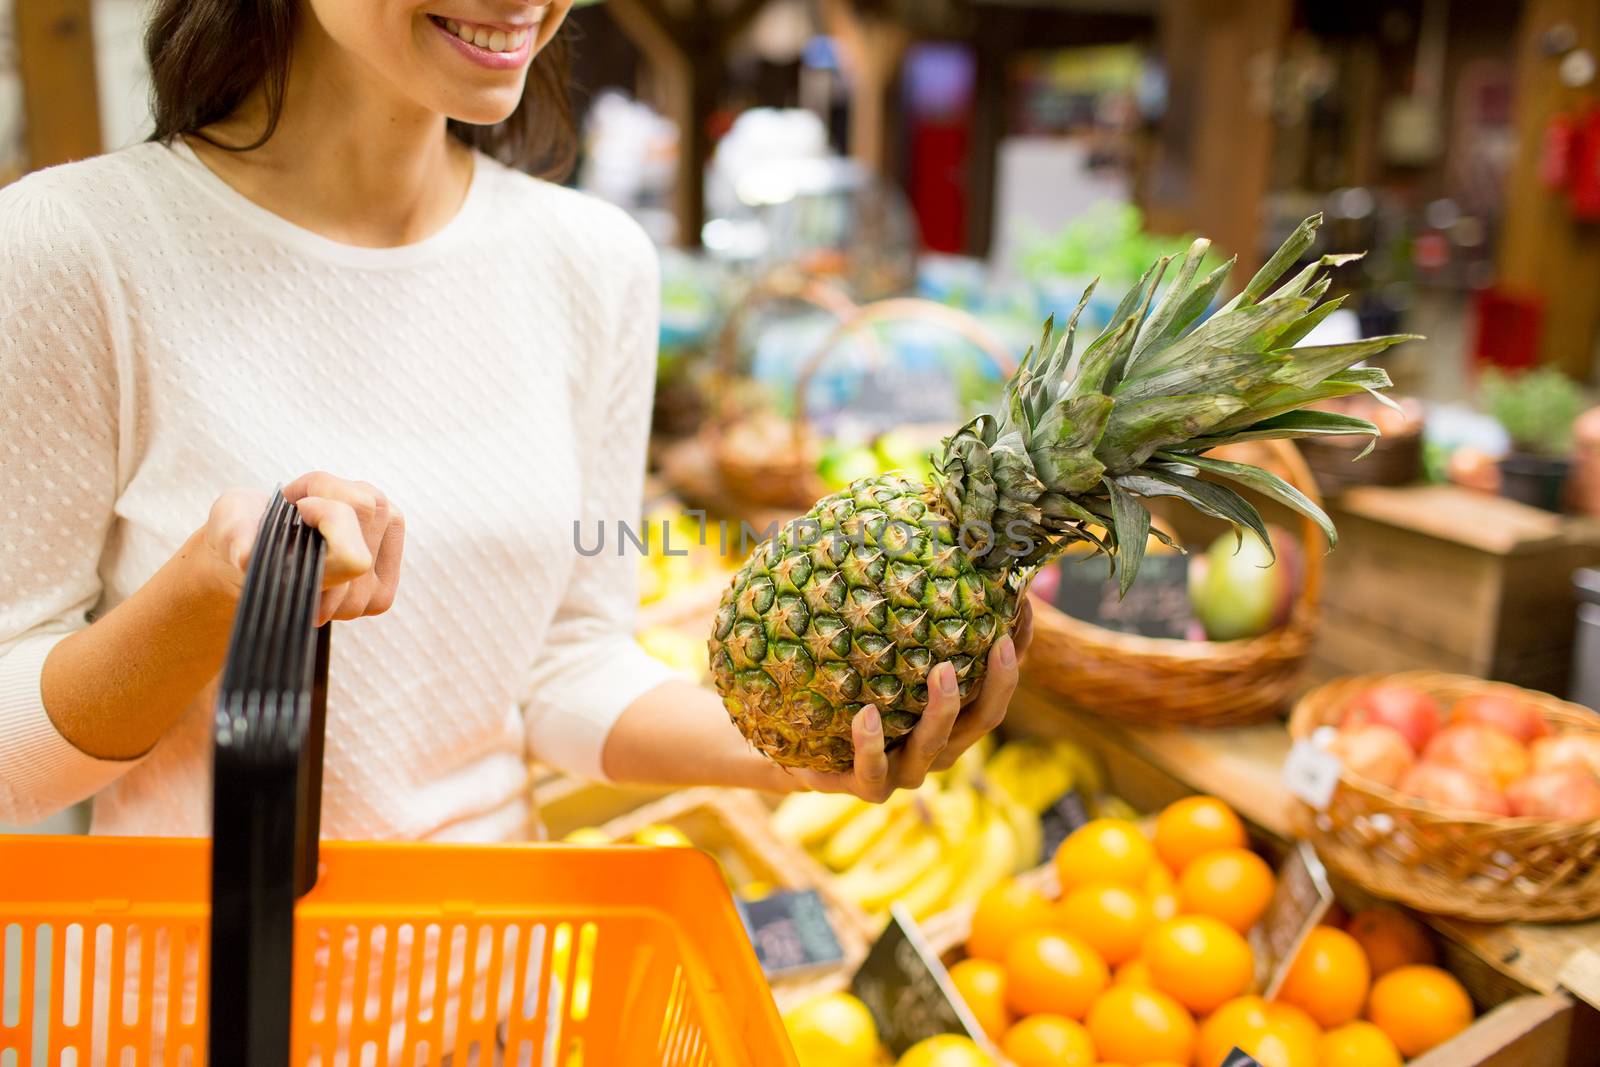 sale, shopping, consumerism and people concept - close up of young woman with food basket and pineapple in grocery market